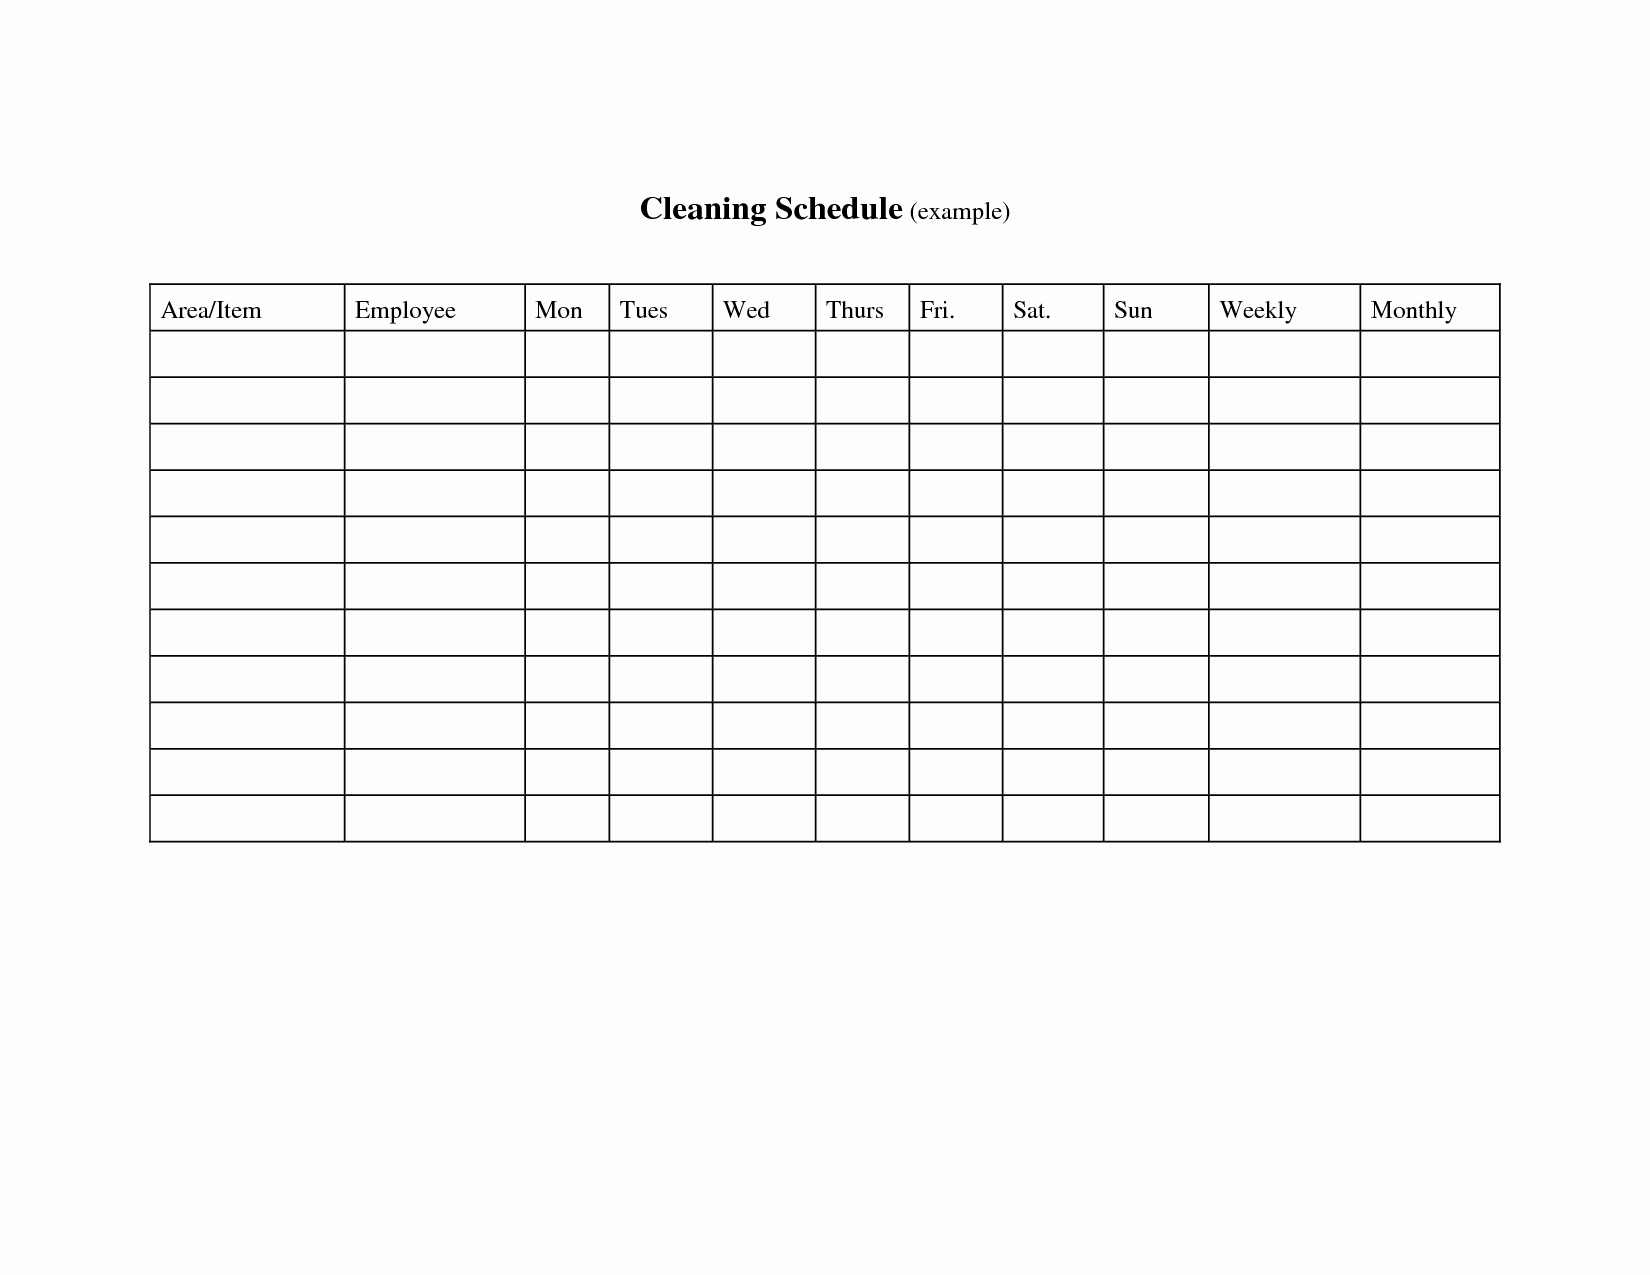 Blank Daily Cleaning Schedule and Record Sheet Fice